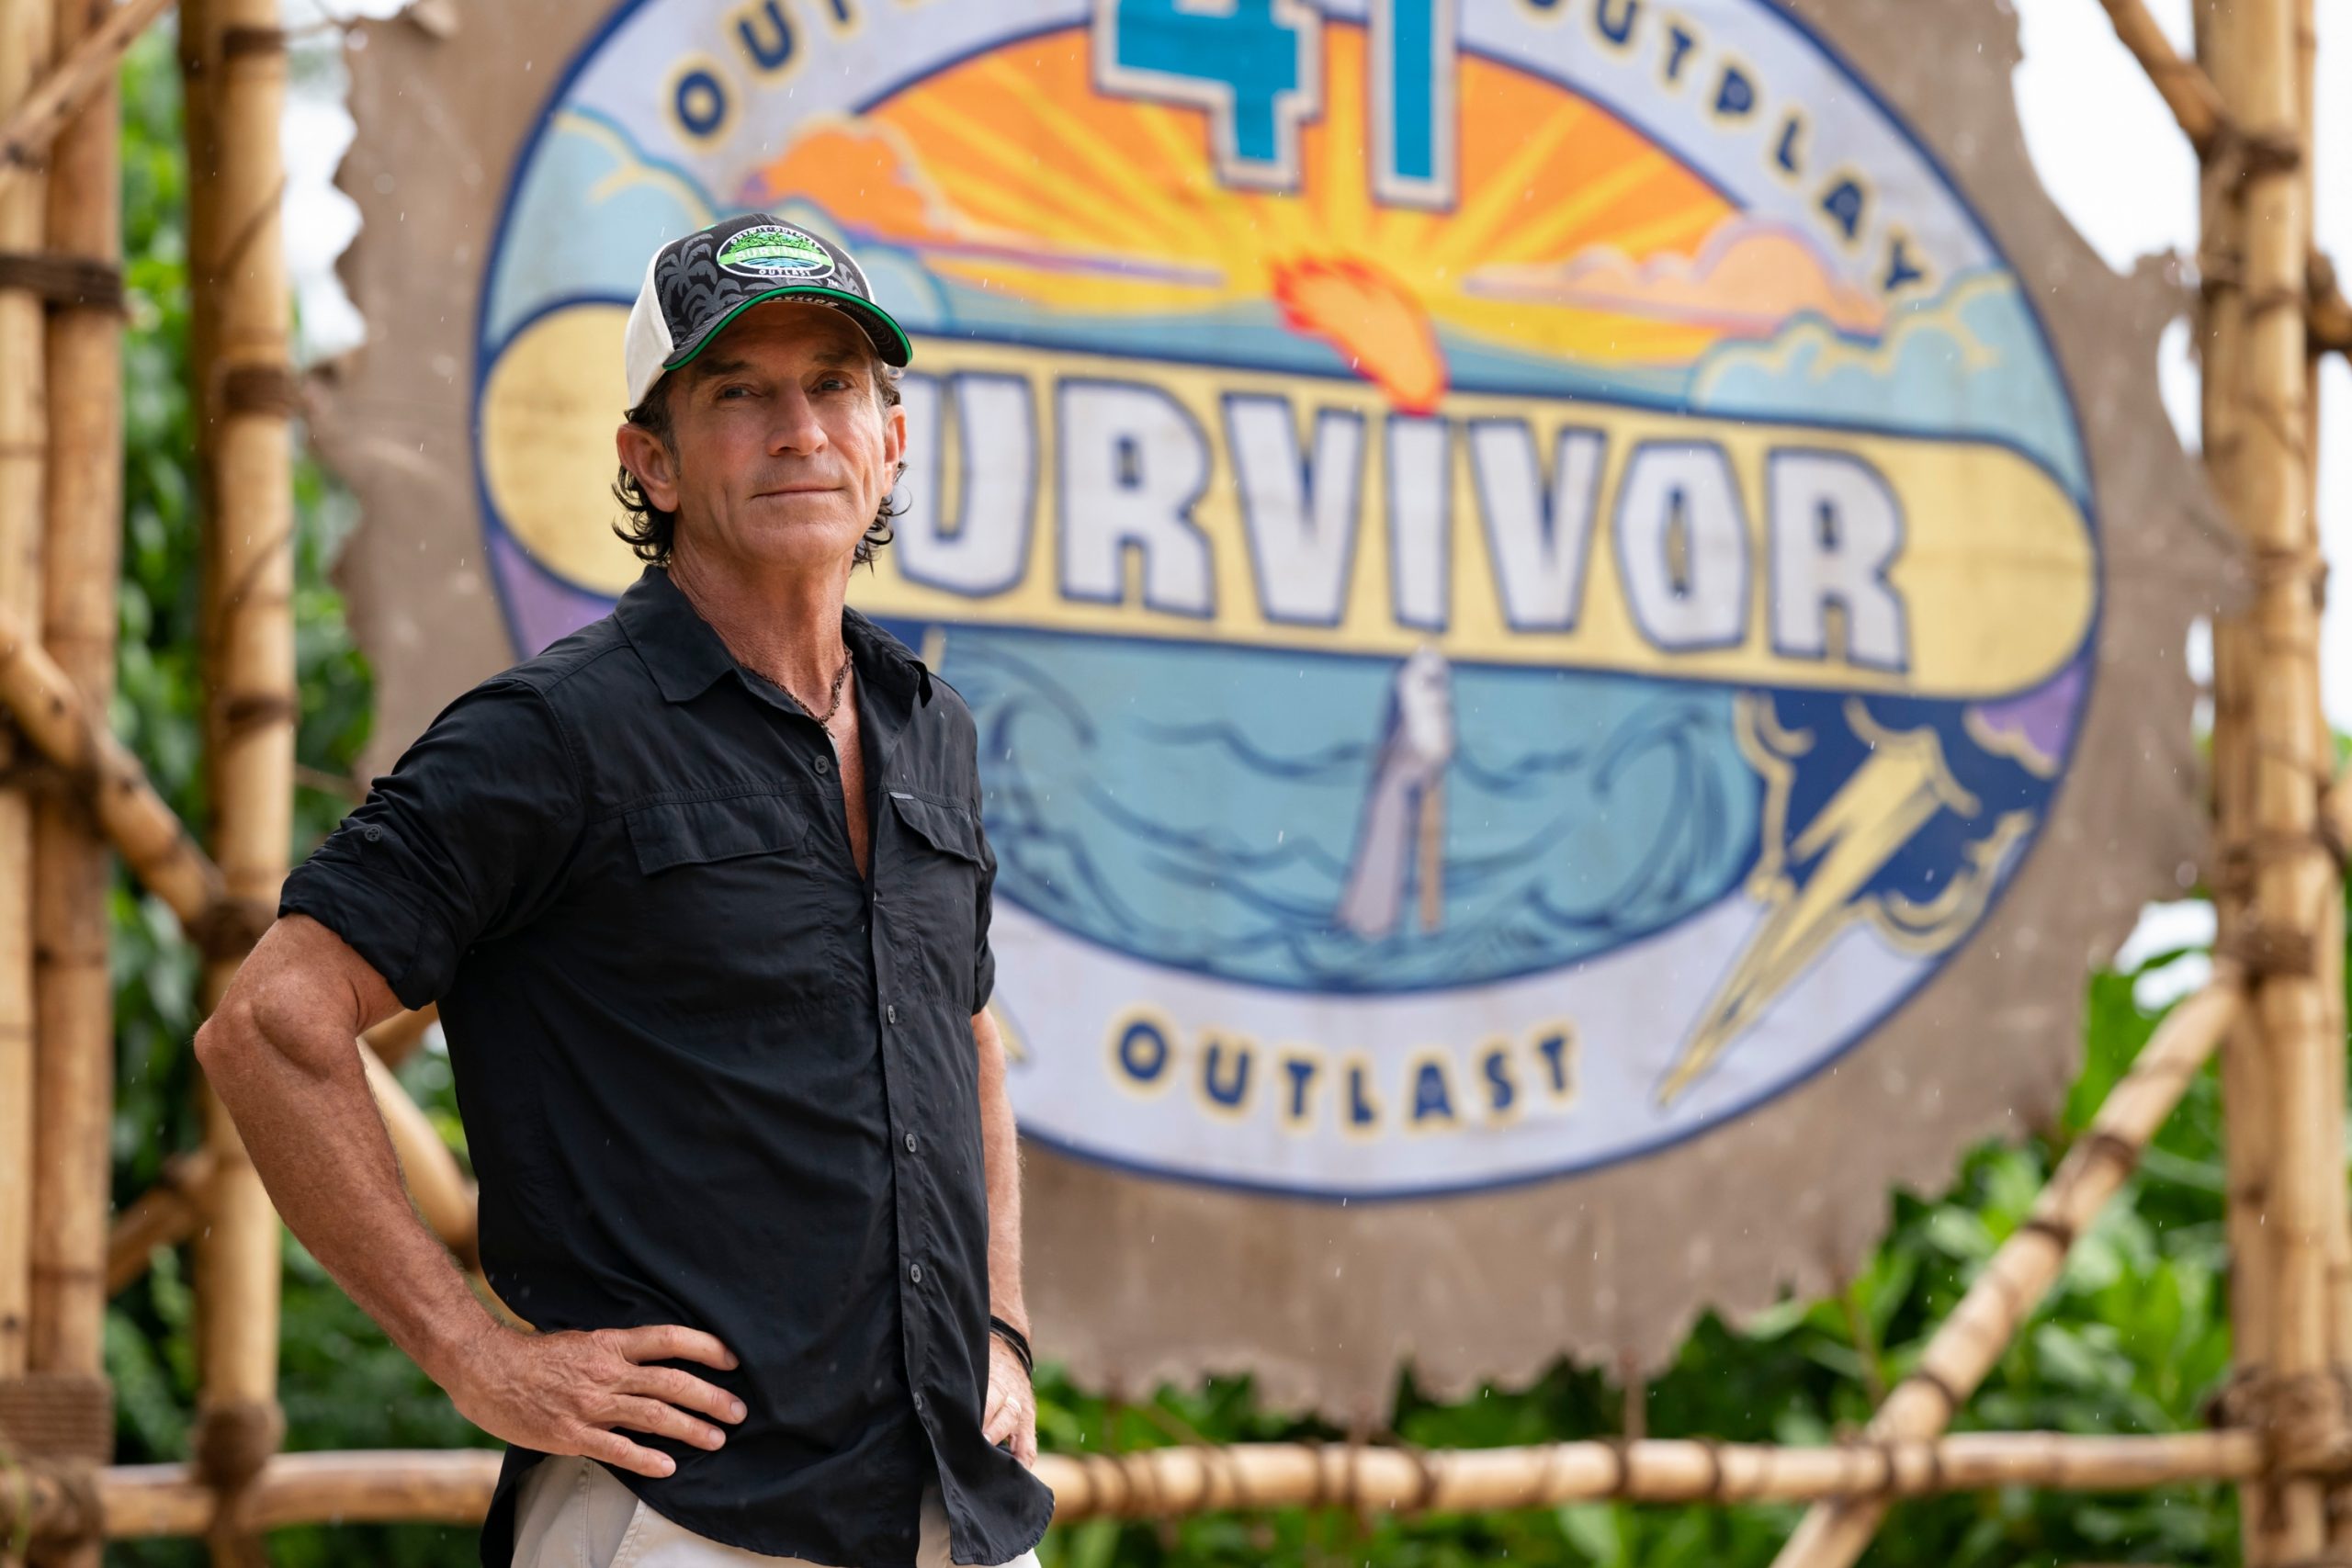 More than a show (what Survivor can teach us about hypocrisy)